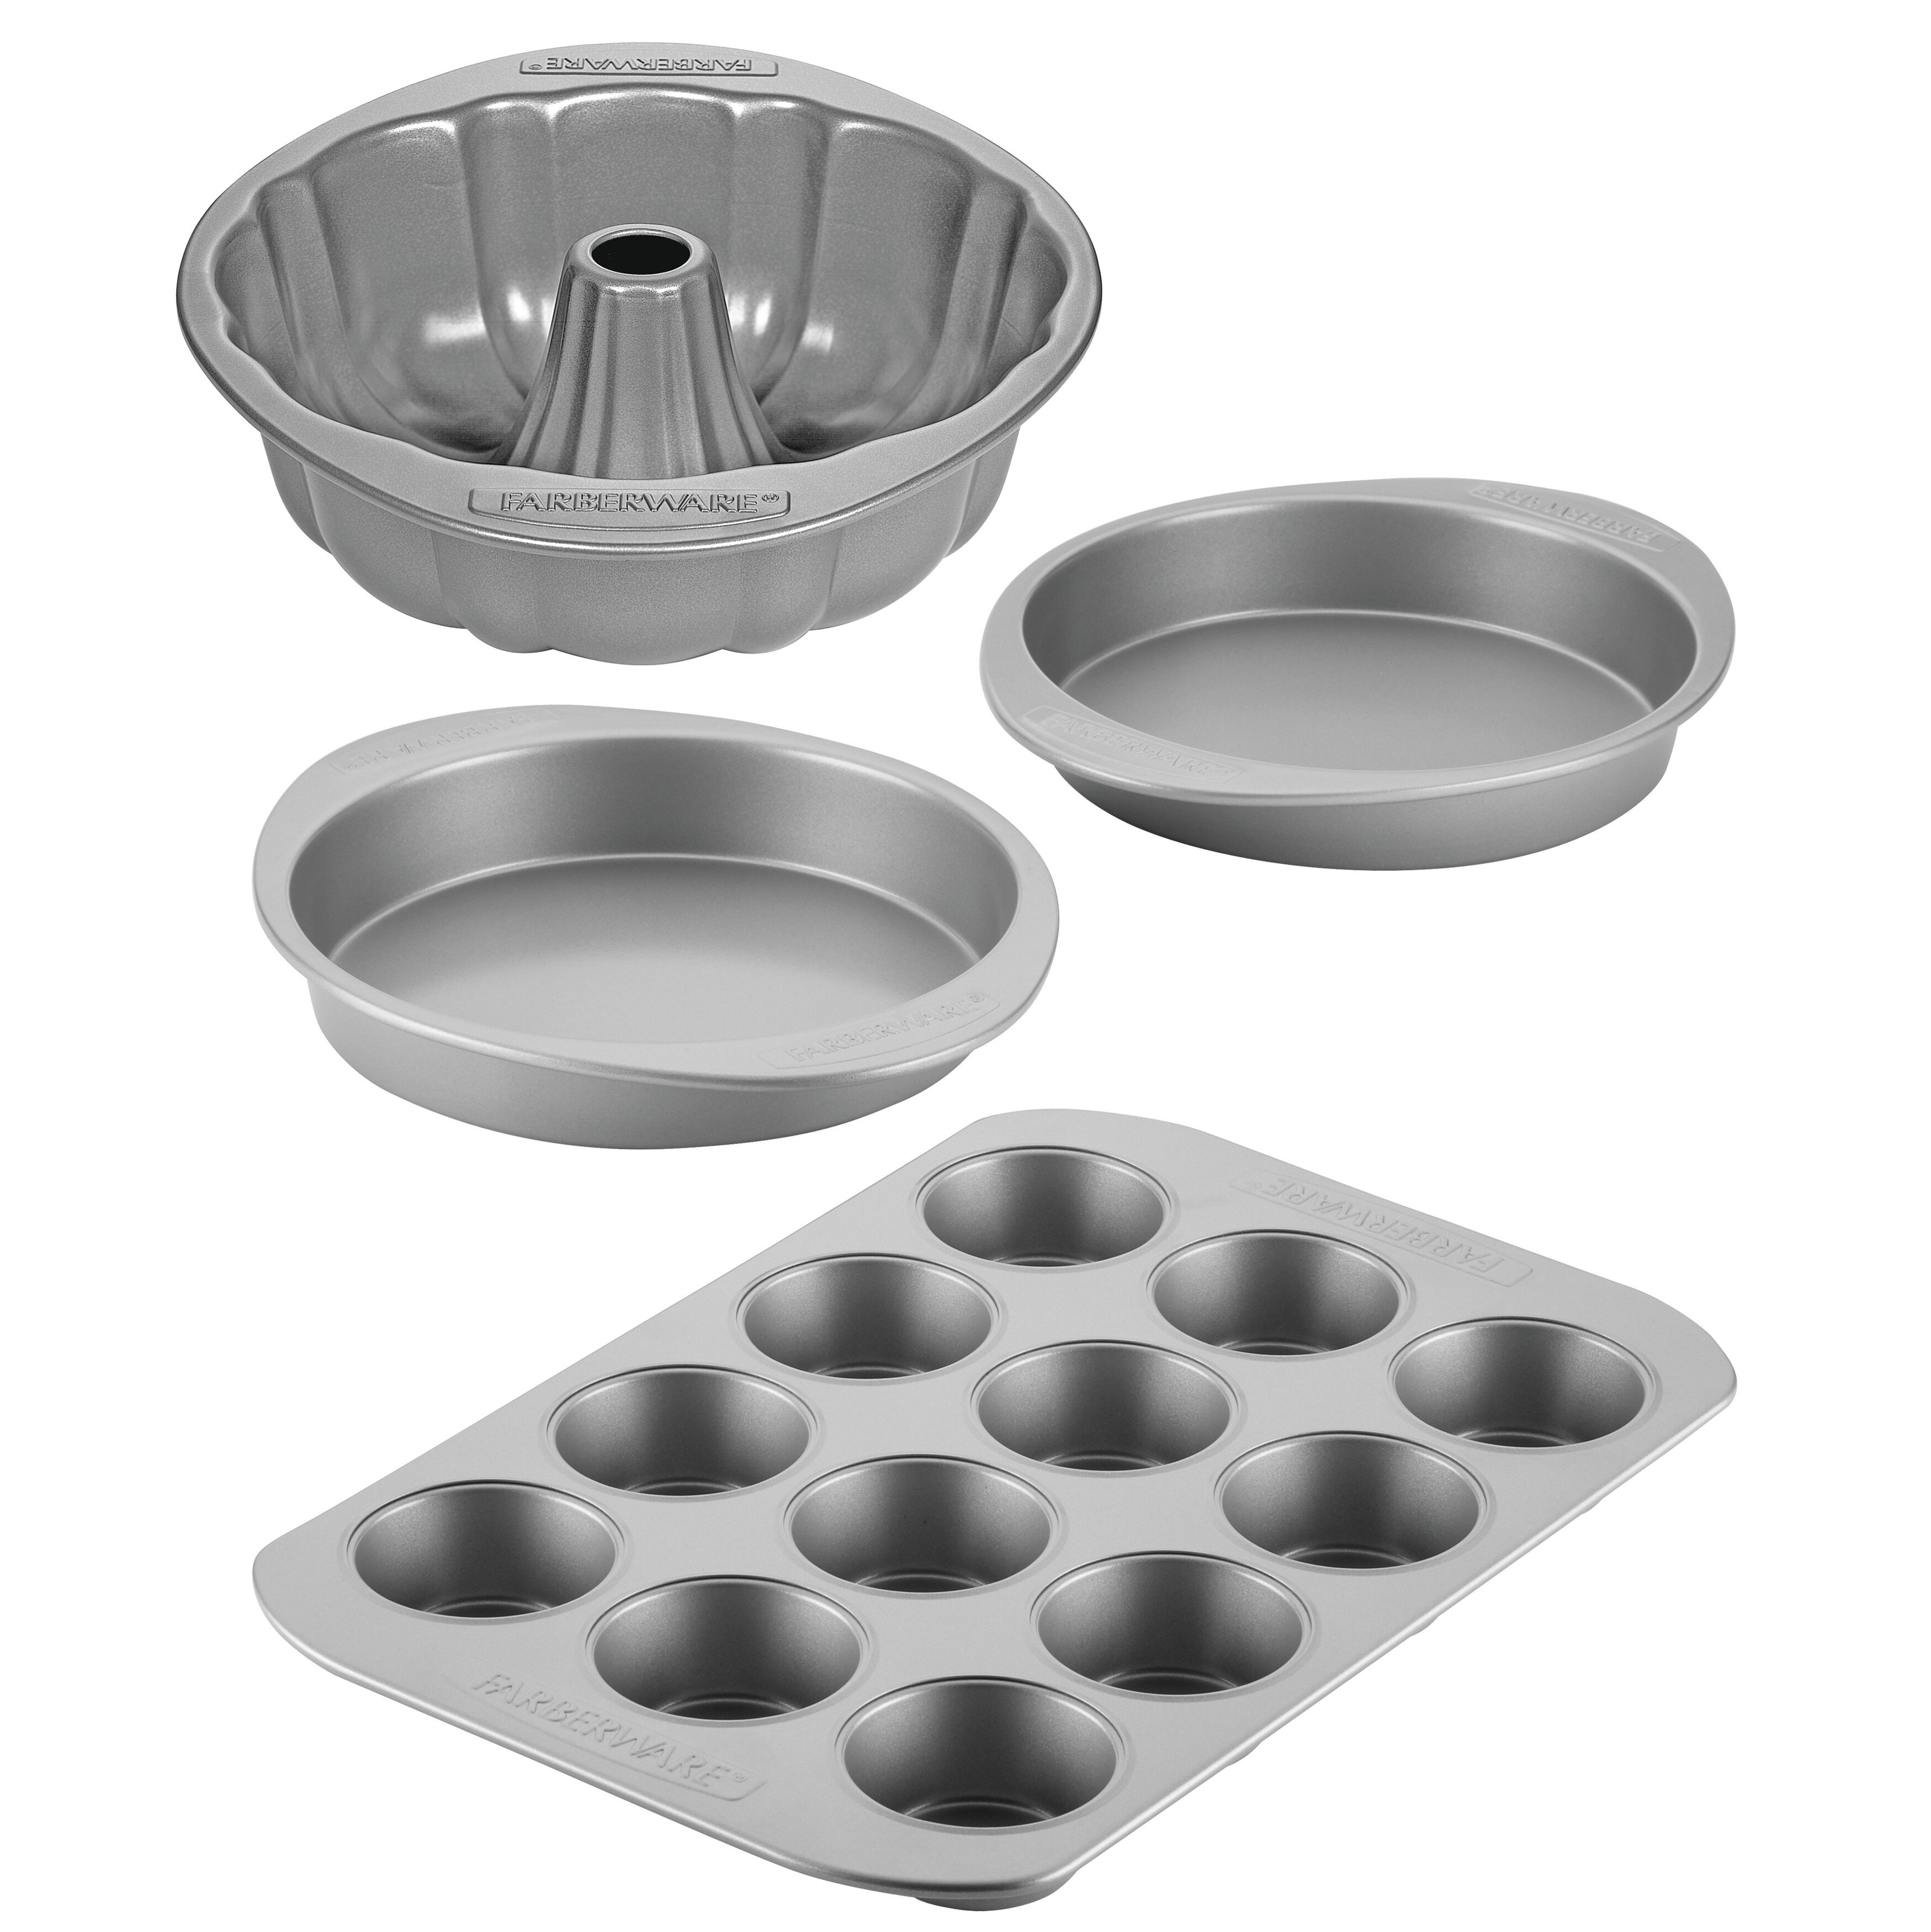 Farberware Bakeware Nonstick Fluted Mold, Cupcake, Muffin, And